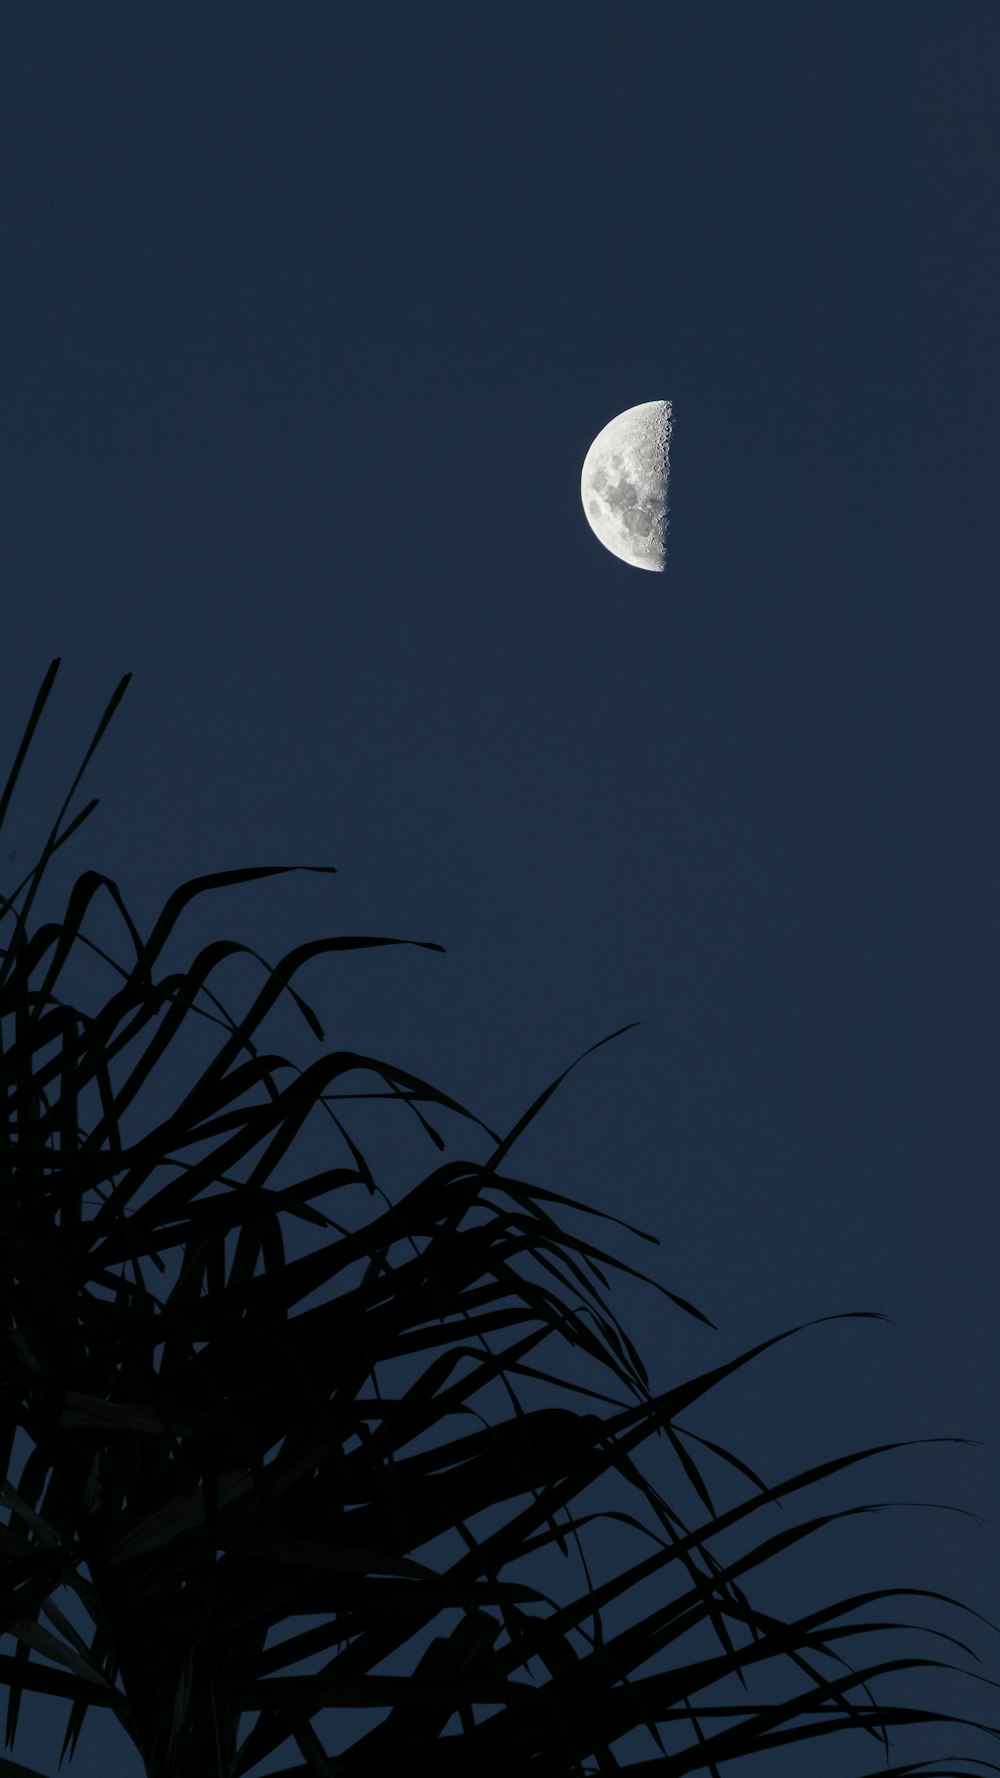 the moon is seen through the branches of a palm tree